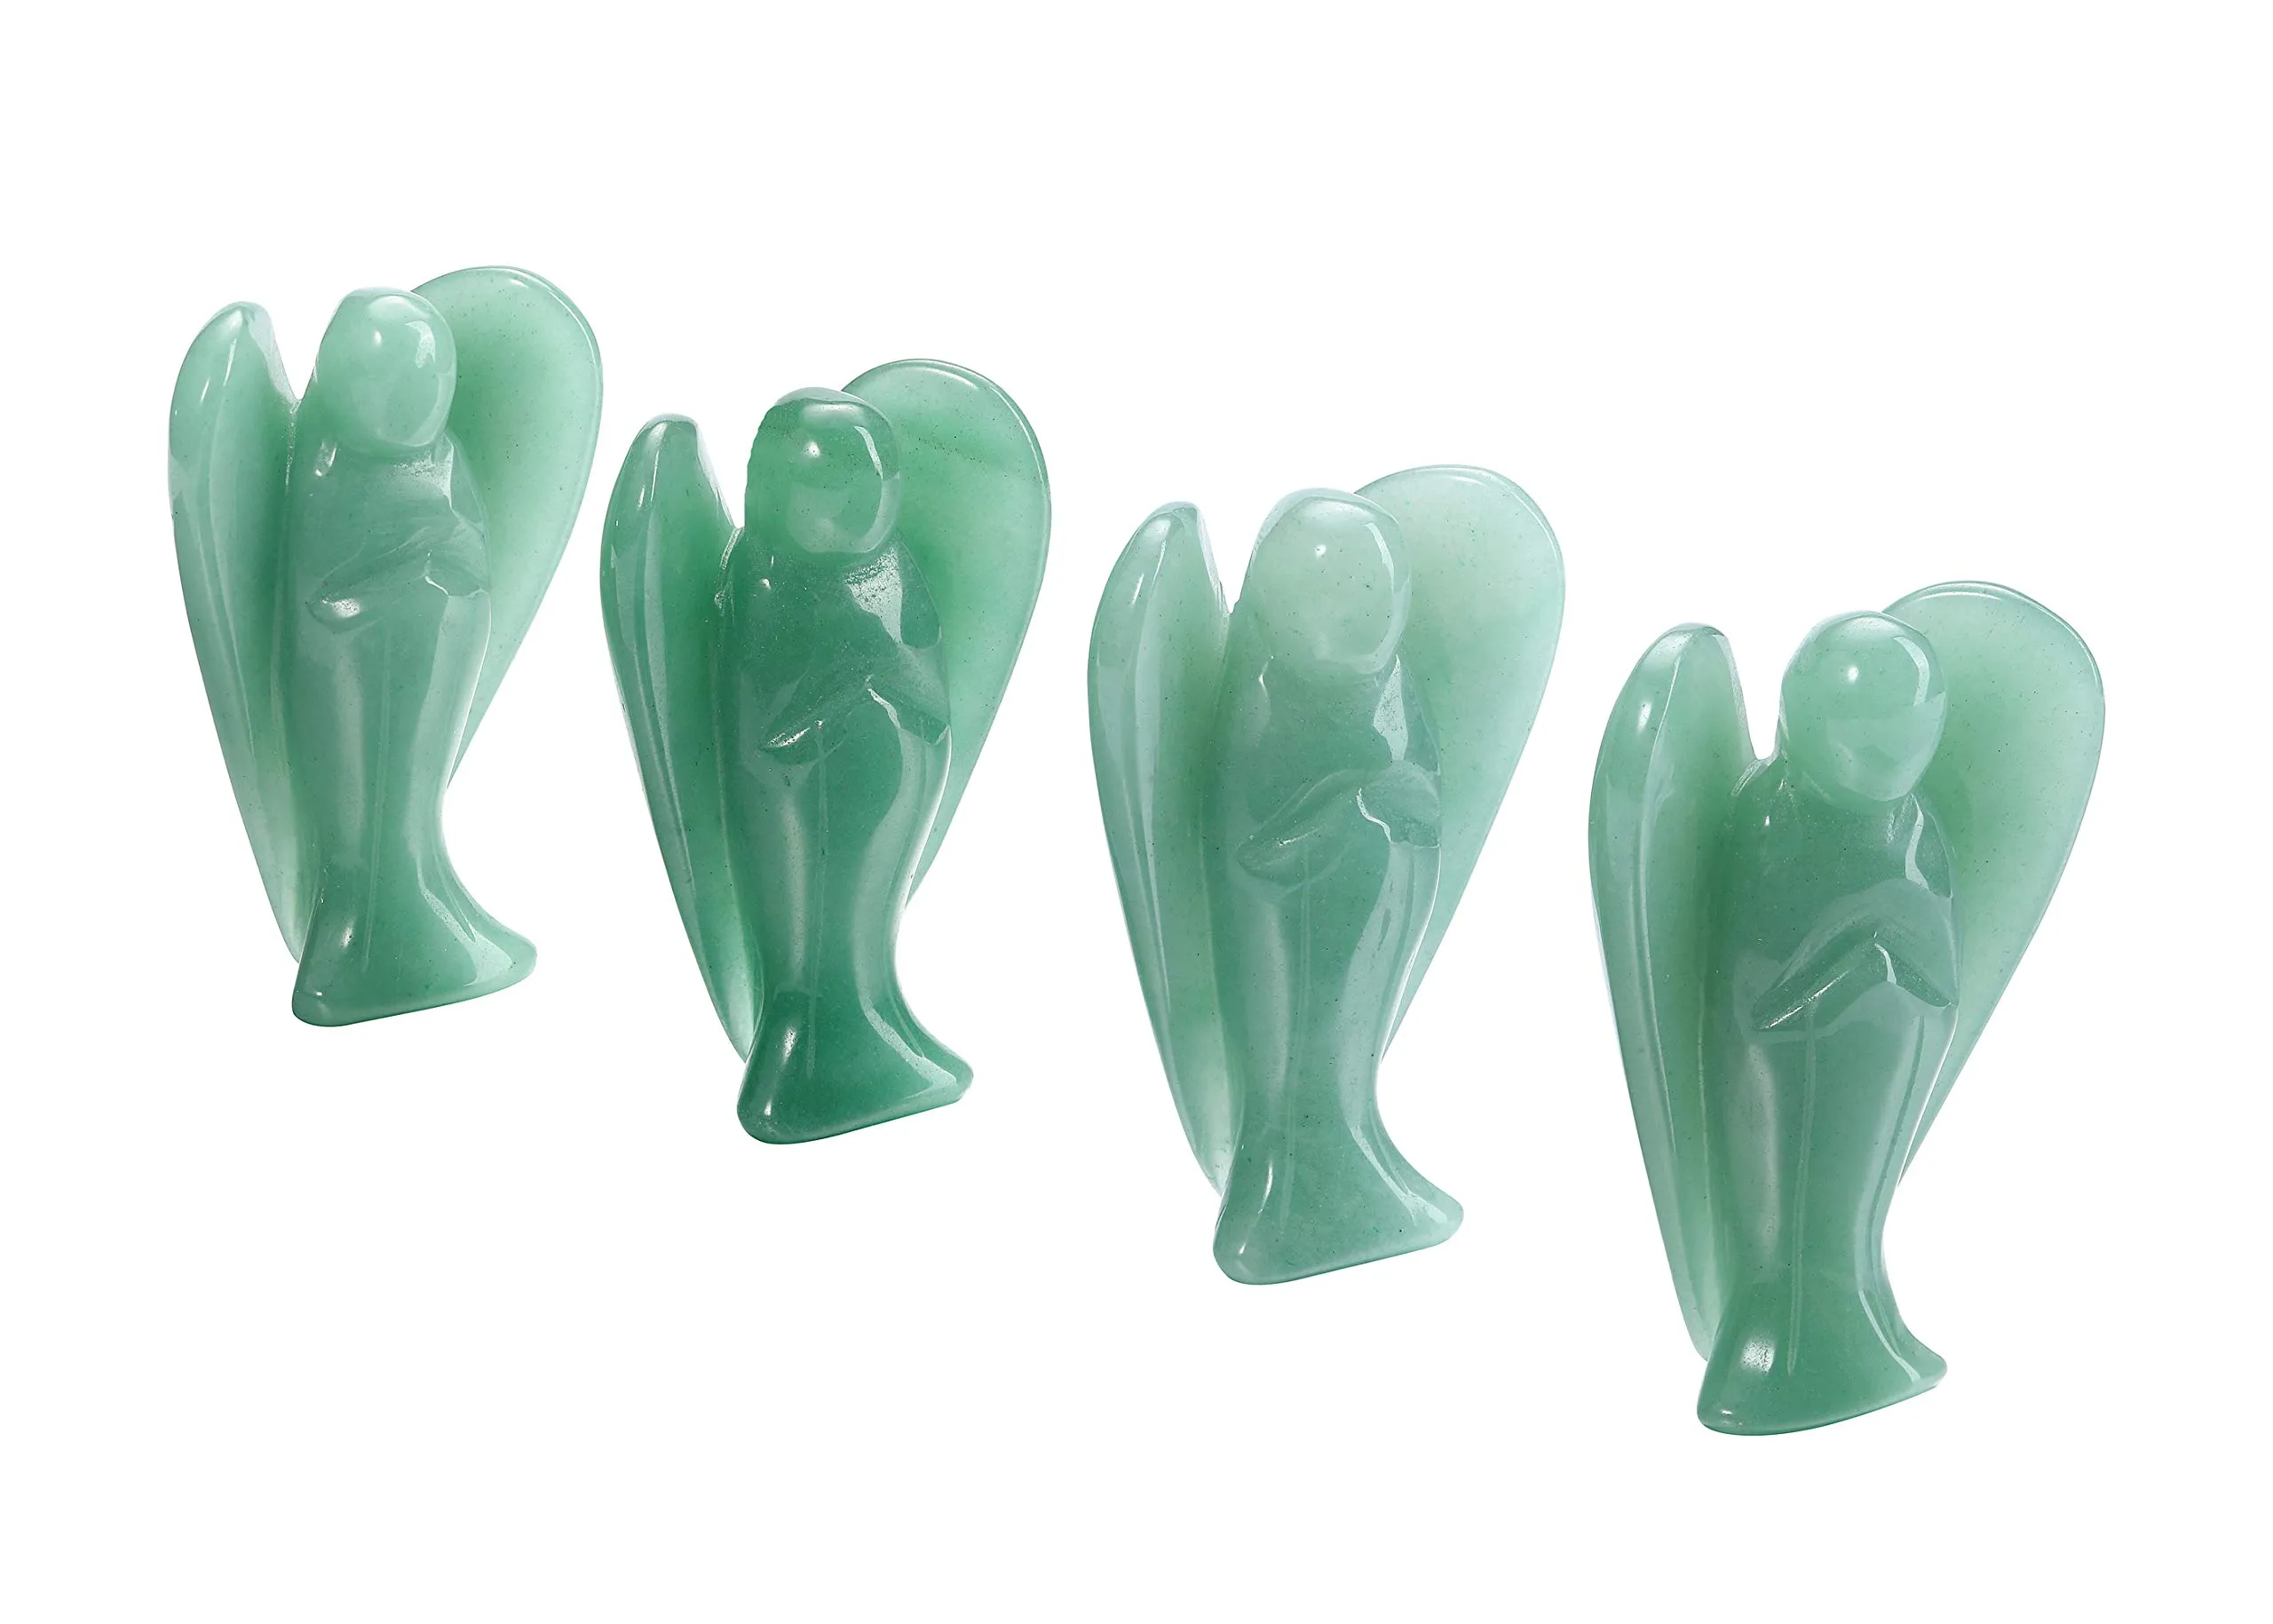 healing green aventurine crystals stone figurines 3 inches carved gemstone guardian angel pocket statues home living room bedroom decor room decoration angel gifts for women